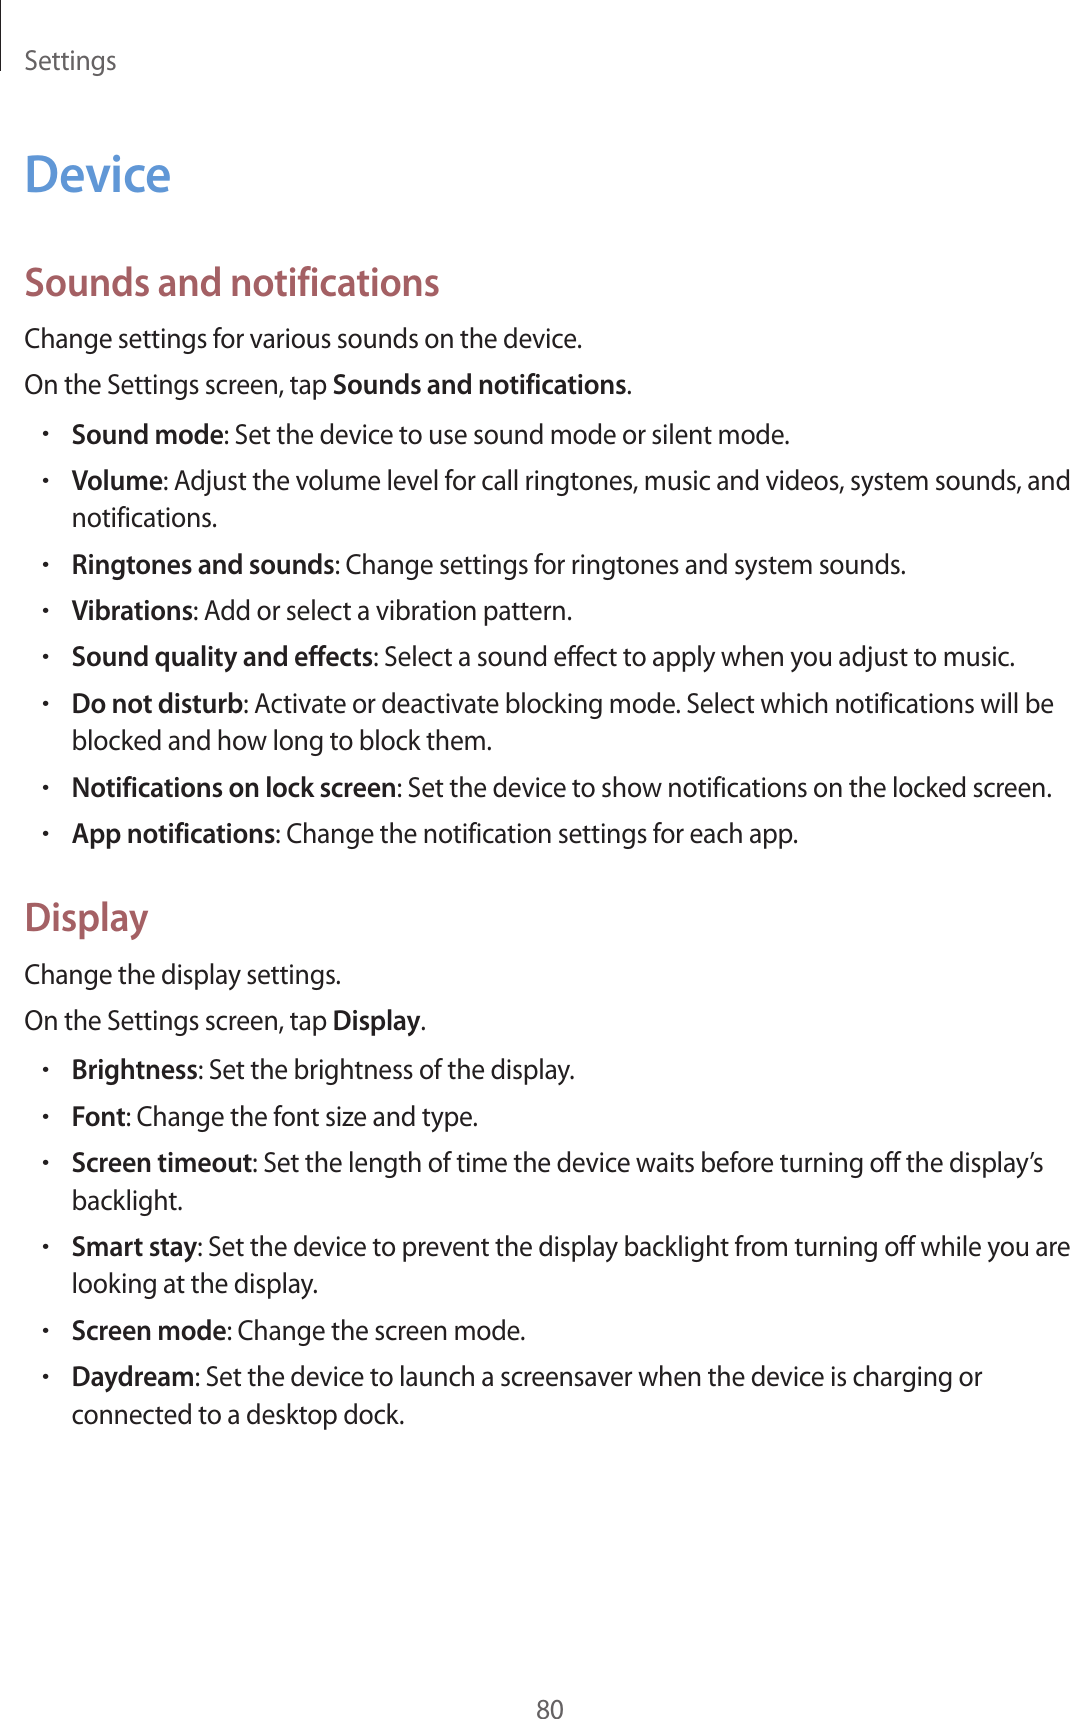 Settings80DeviceSounds and notificationsChange settings for various sounds on the device.On the Settings screen, tap Sounds and notifications.•Sound mode: Set the device to use sound mode or silent mode.•Volume: Adjust the volume level for call ringtones, music and videos, system sounds, and notifications.•Ringtones and sounds: Change settings for ringtones and system sounds.•Vibrations: Add or select a vibration pattern.•Sound quality and effects: Select a sound effect to apply when you adjust to music.•Do not disturb: Activate or deactivate blocking mode. Select which notifications will be blocked and how long to block them.•Notifications on lock screen: Set the device to show notifications on the locked screen.•App notifications: Change the notification settings for each app.DisplayChange the display settings.On the Settings screen, tap Display.•Brightness: Set the brightness of the display.•Font: Change the font size and type.•Screen timeout: Set the length of time the device waits before turning off the display’s backlight.•Smart stay: Set the device to prevent the display backlight from turning off while you are looking at the display.•Screen mode: Change the screen mode.•Daydream: Set the device to launch a screensaver when the device is charging or connected to a desktop dock.